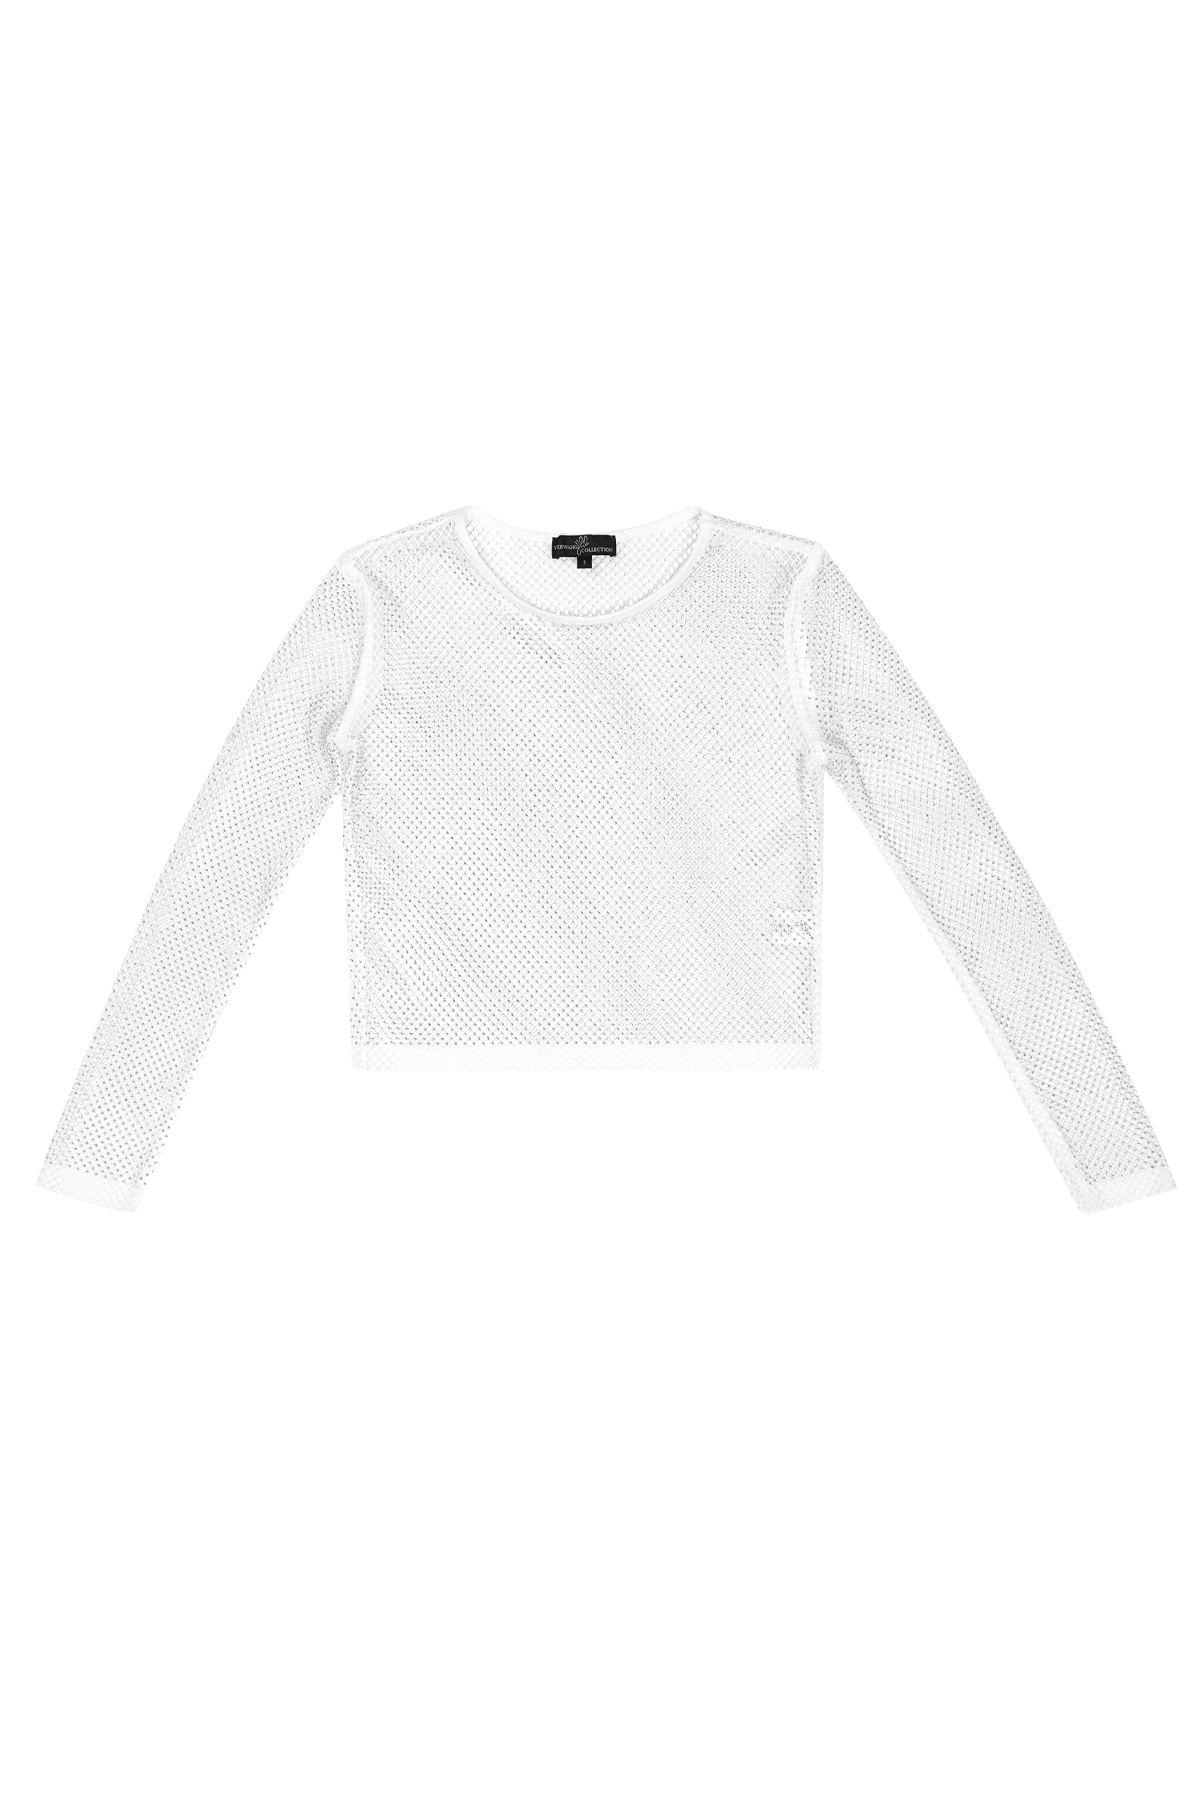 Sparkly long sleeve top - white - L 